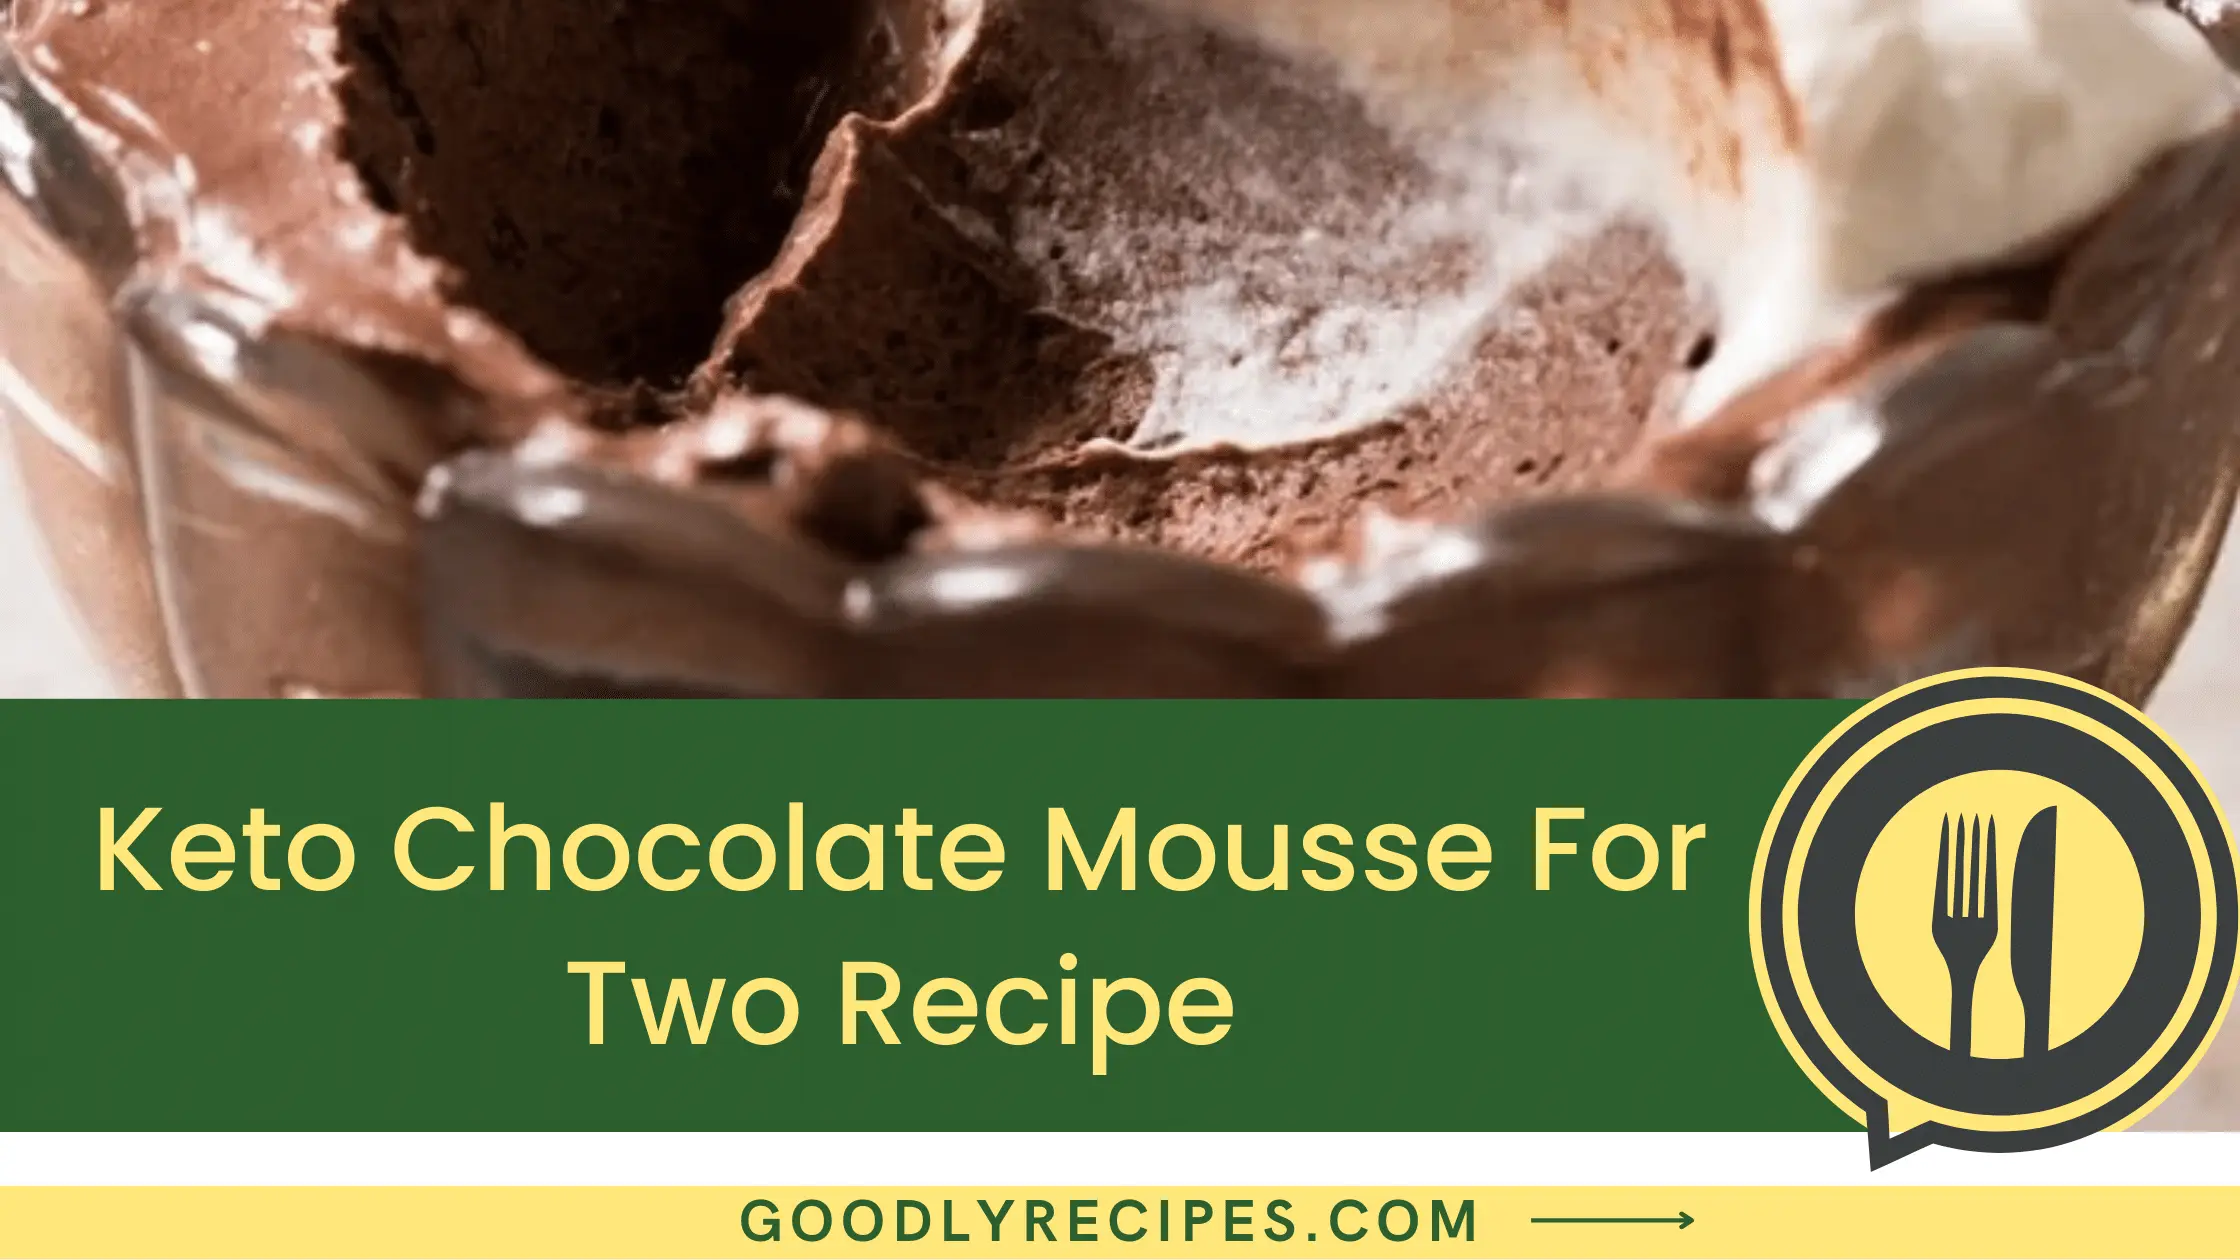 Keto Chocolate Mousse For Two Recipe - For Food Lovers